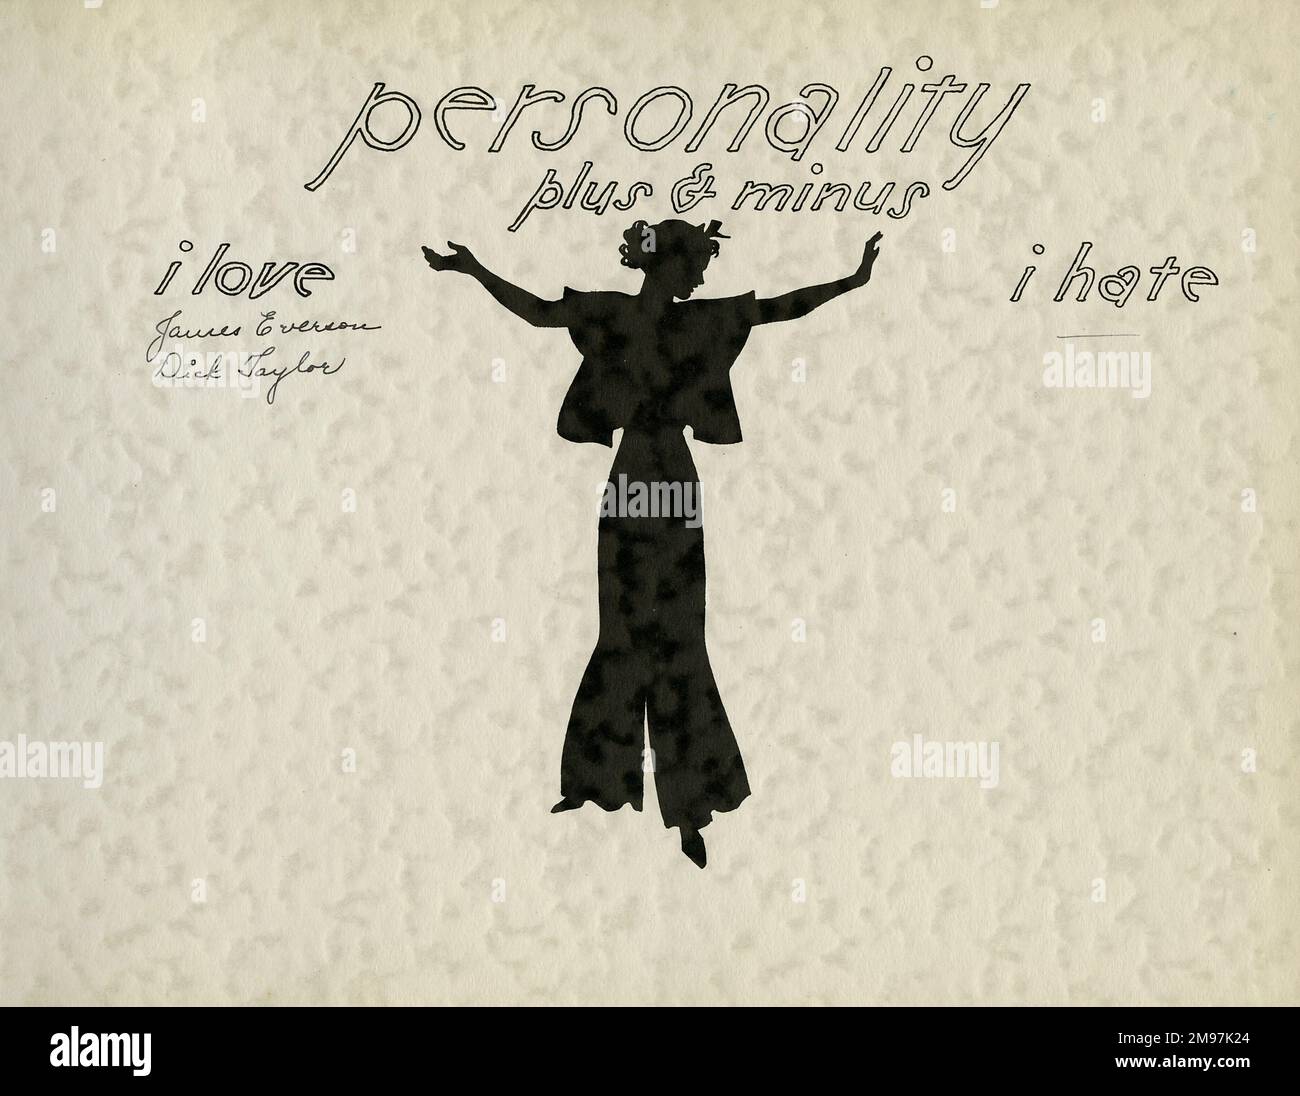 Page design for personality (plus and minus, I love, I hate), in School Silhouettes, once owned by a female student of Fayetteville High School, New York, USA. Depicting a young woman standing with her arms outstretched. The names of two men have been written under the 'I love' heading. Stock Photo